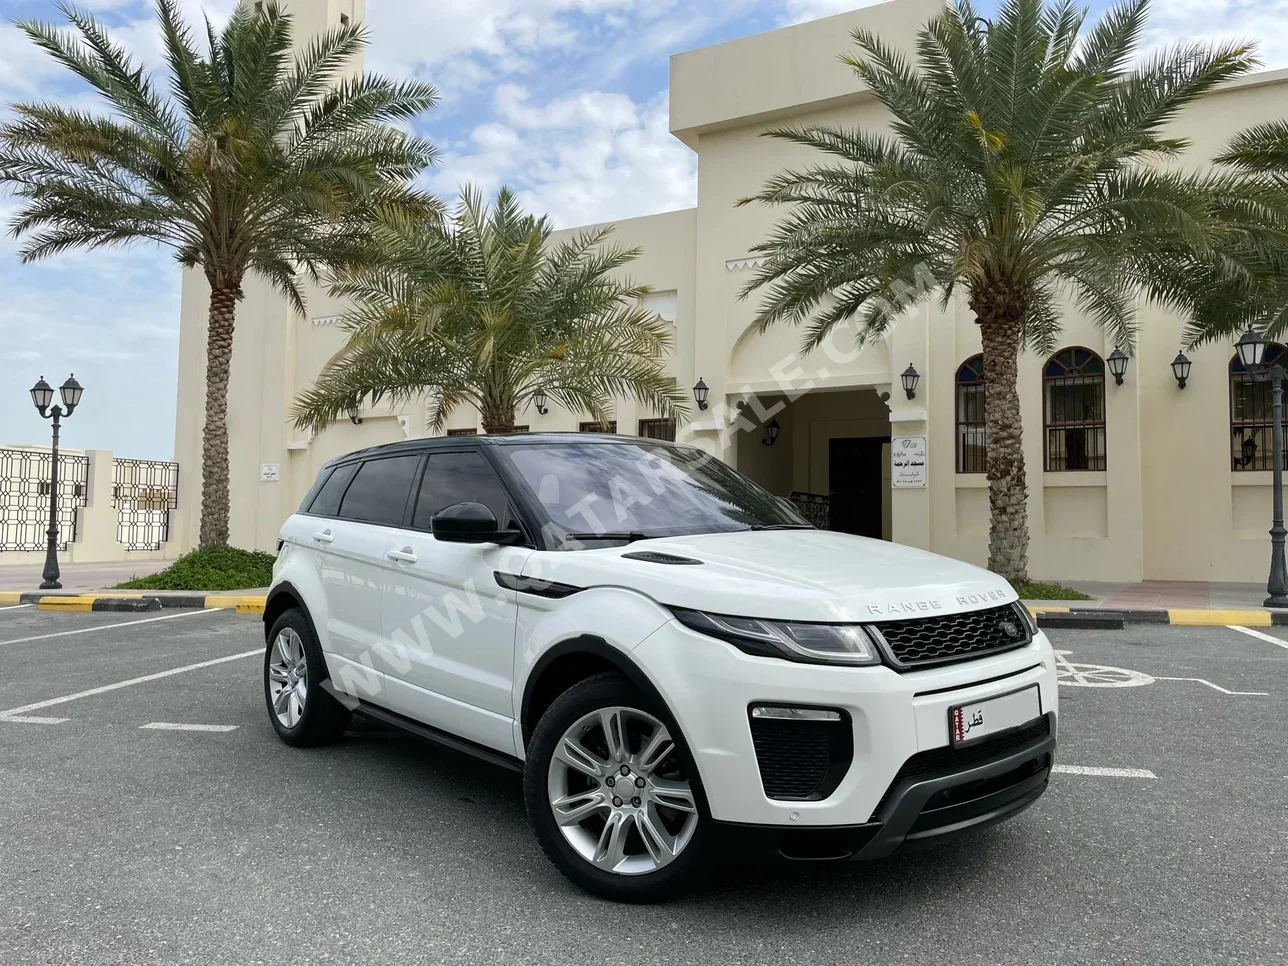 Land Rover  Evoque  Dynamic plus  2017  Automatic  109,000 Km  4 Cylinder  Four Wheel Drive (4WD)  SUV  White